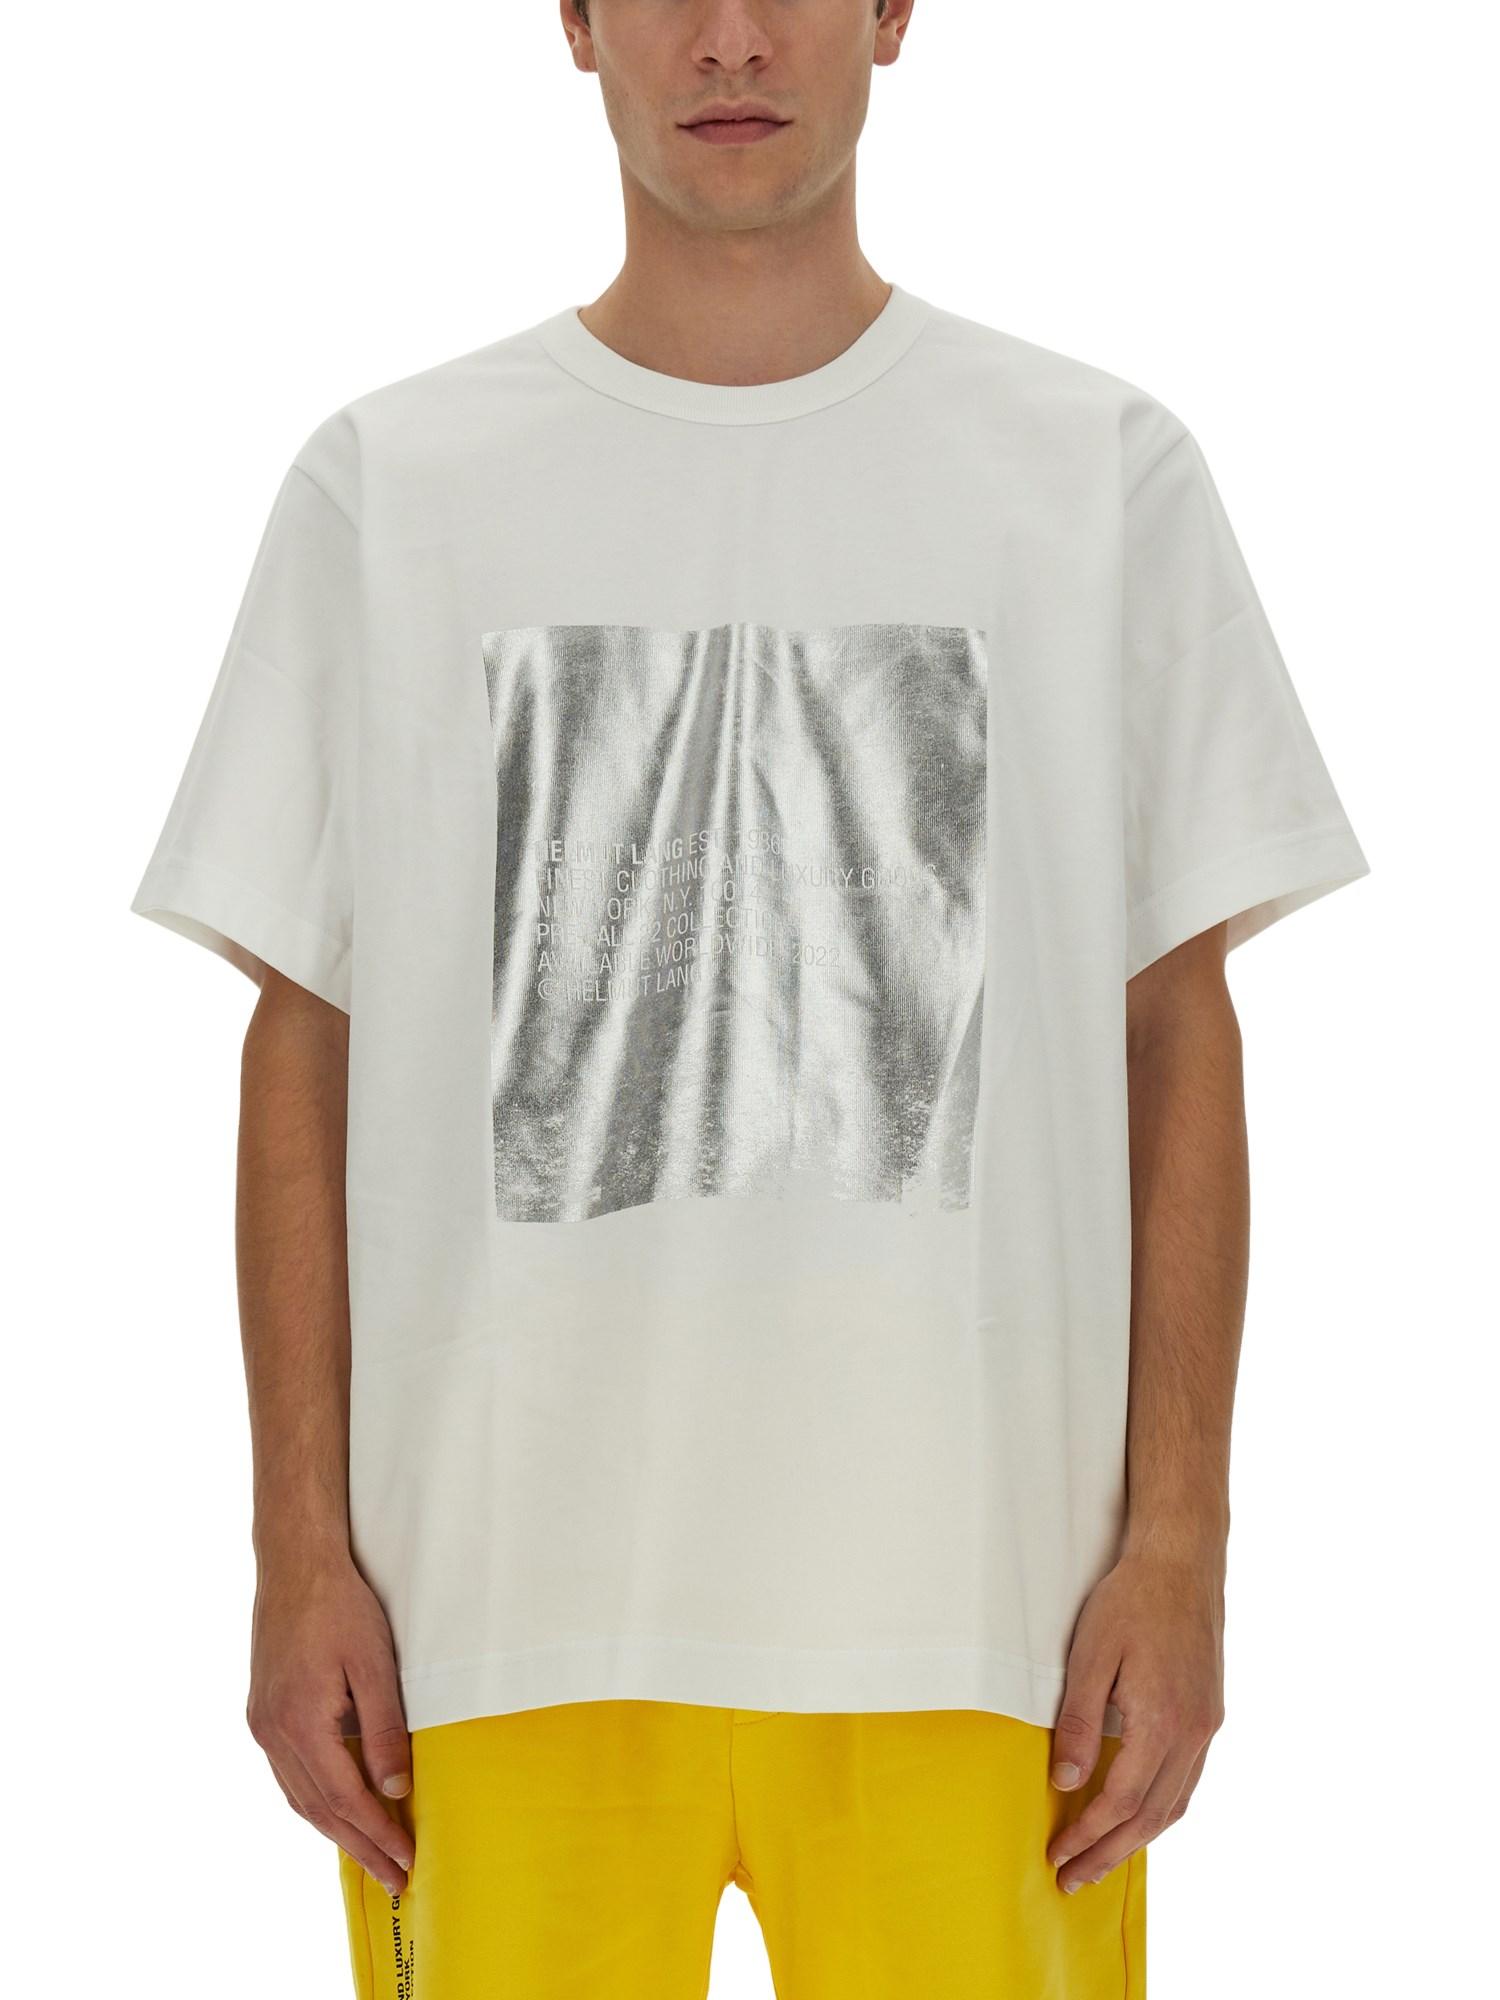 Helmut Lang "silver" T-shirt in Gray for Men | Lyst